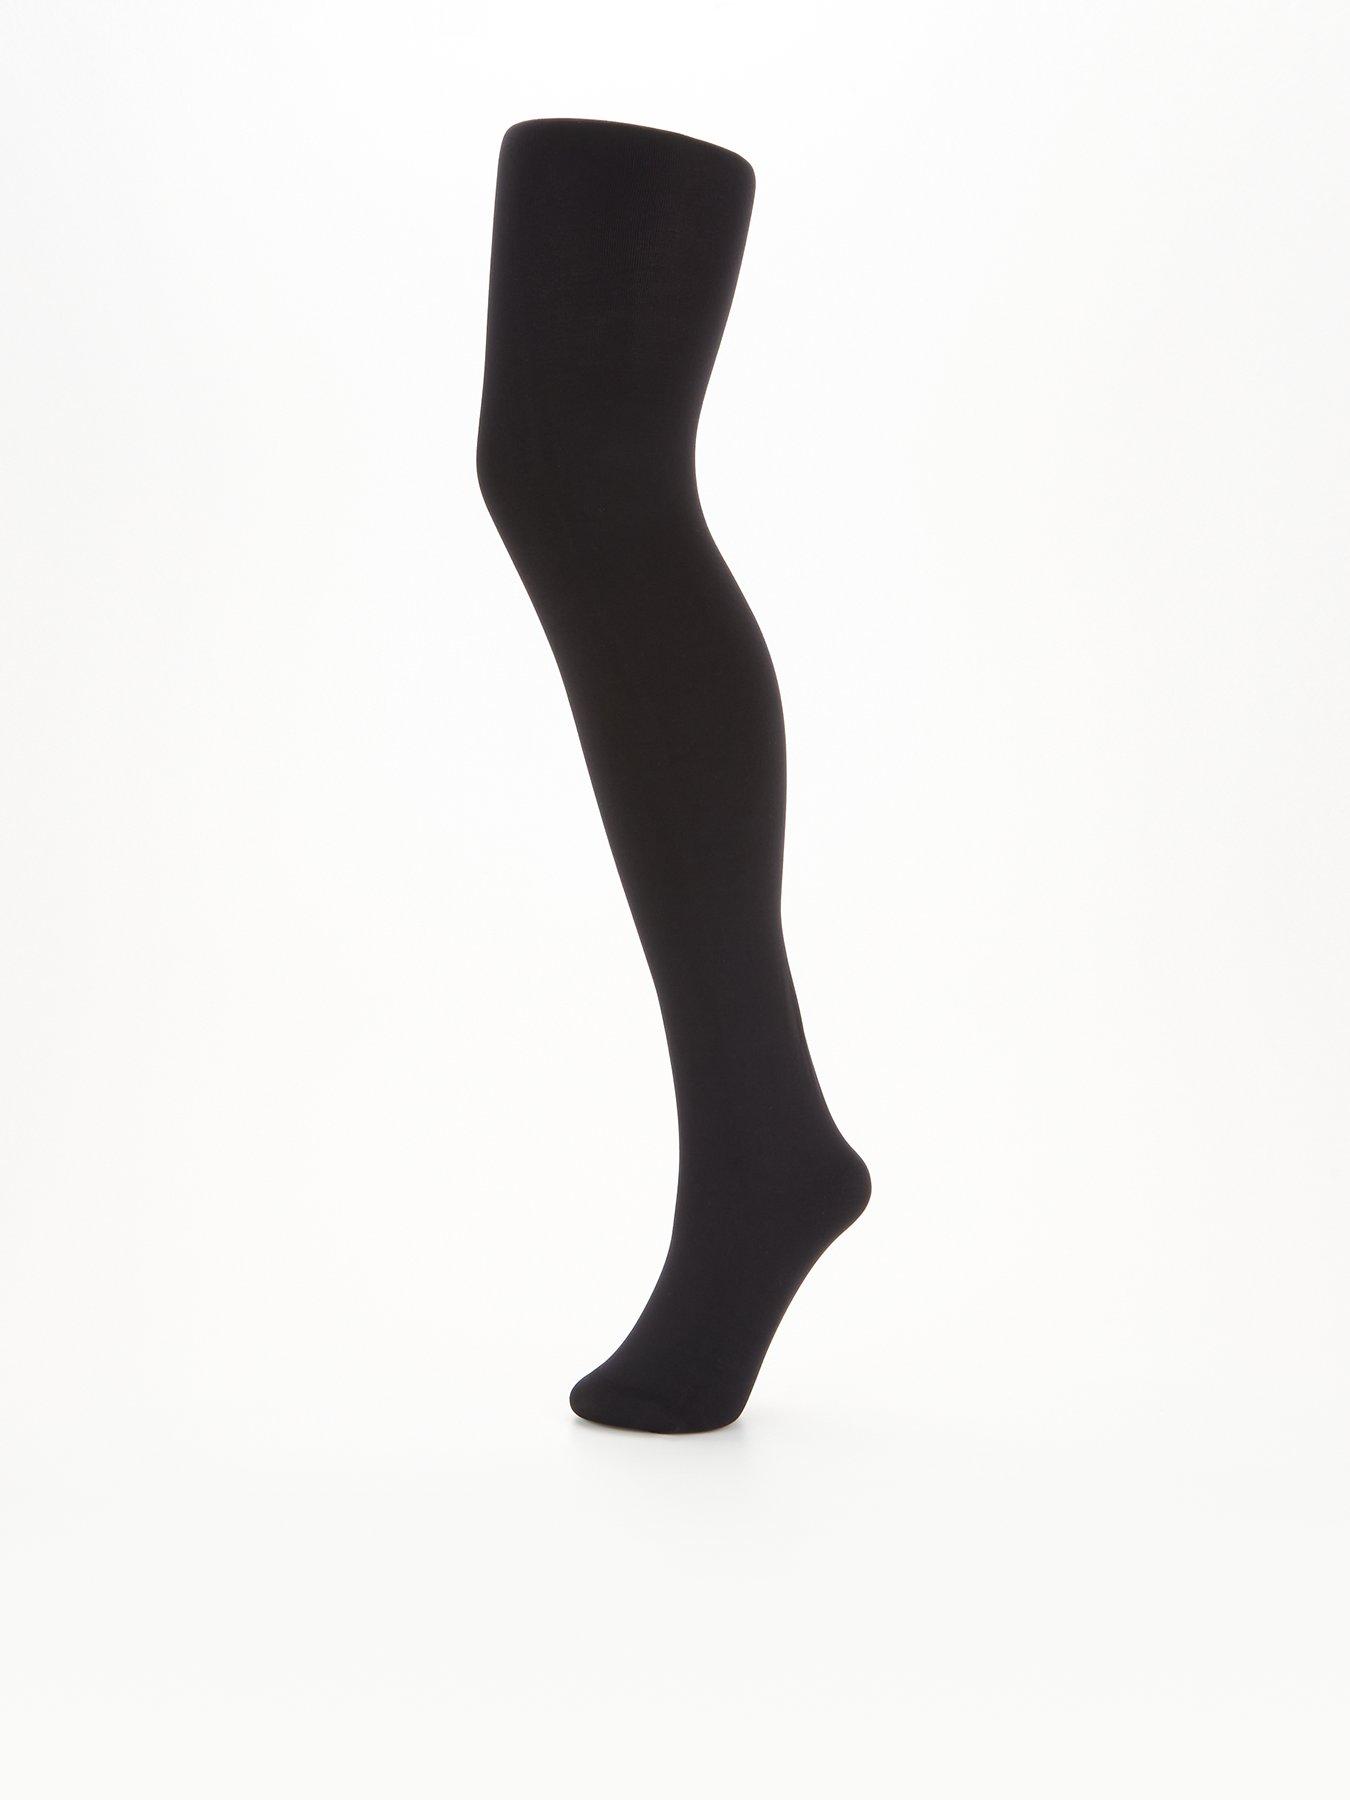 Maximus Mens 100 Denier Opaque Tights In Stock At UK Tights